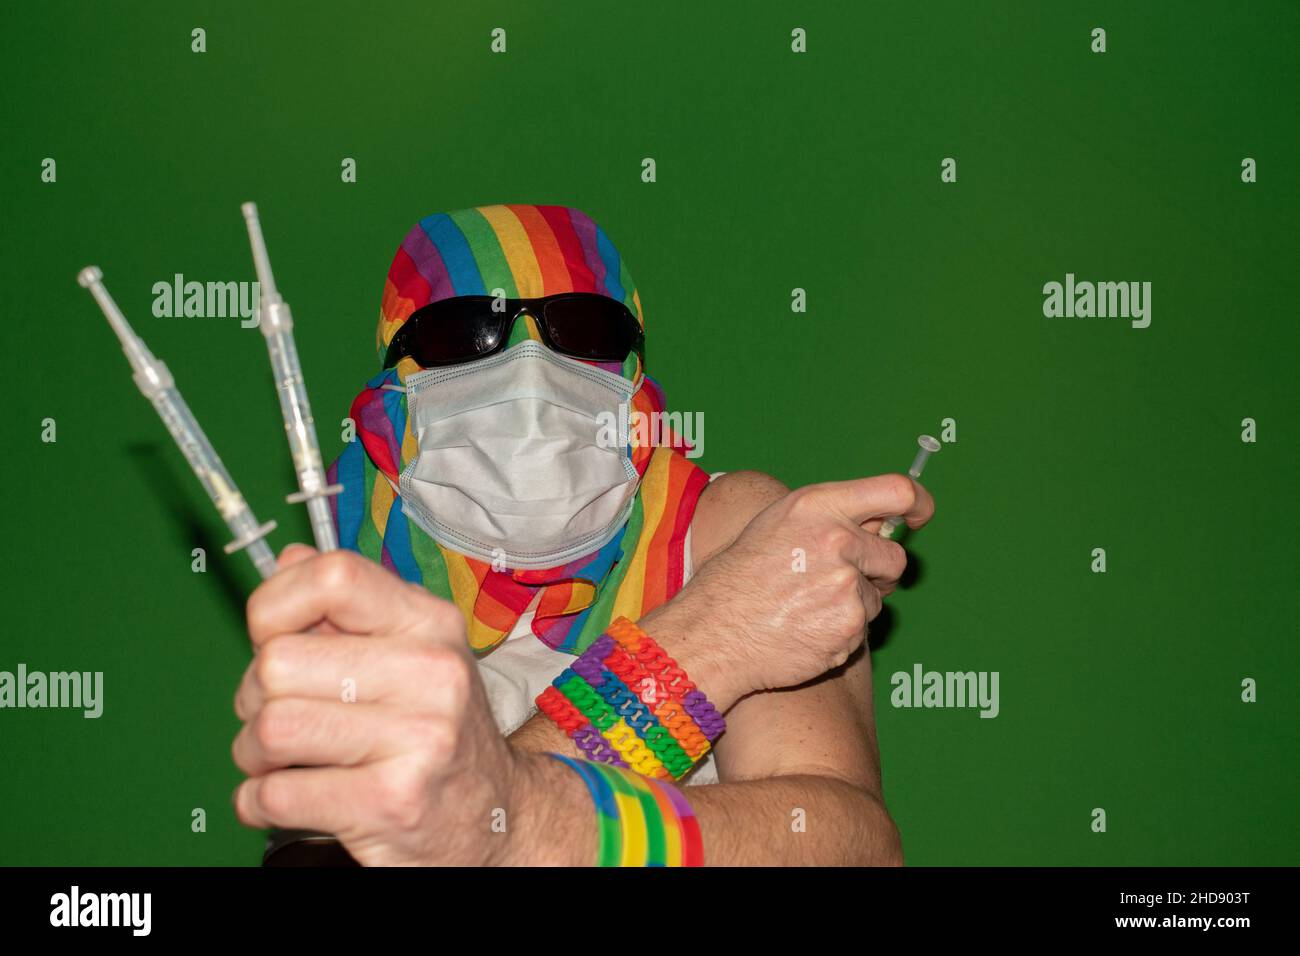 Vaduz, Liechtenstein, December 24, 2021 Person with a medical face mask and a gender rainbow flag is showing some syringes Stock Photo